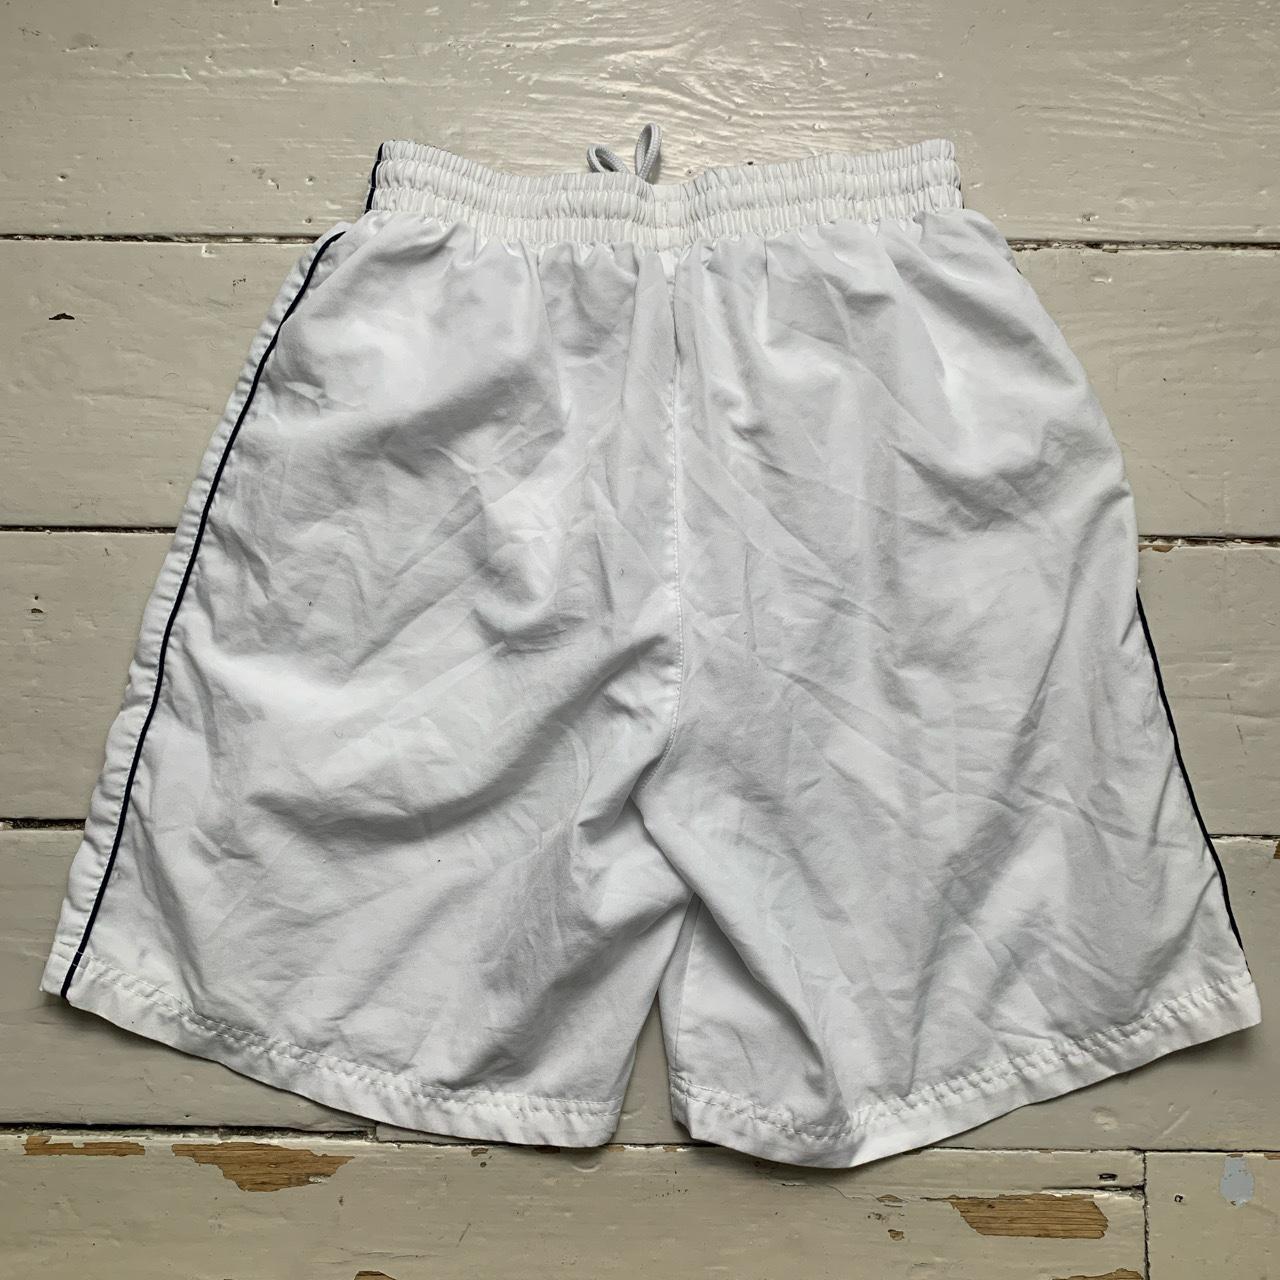 Umbro White Navy and Brown Vintage Shell Track Pant Shorts